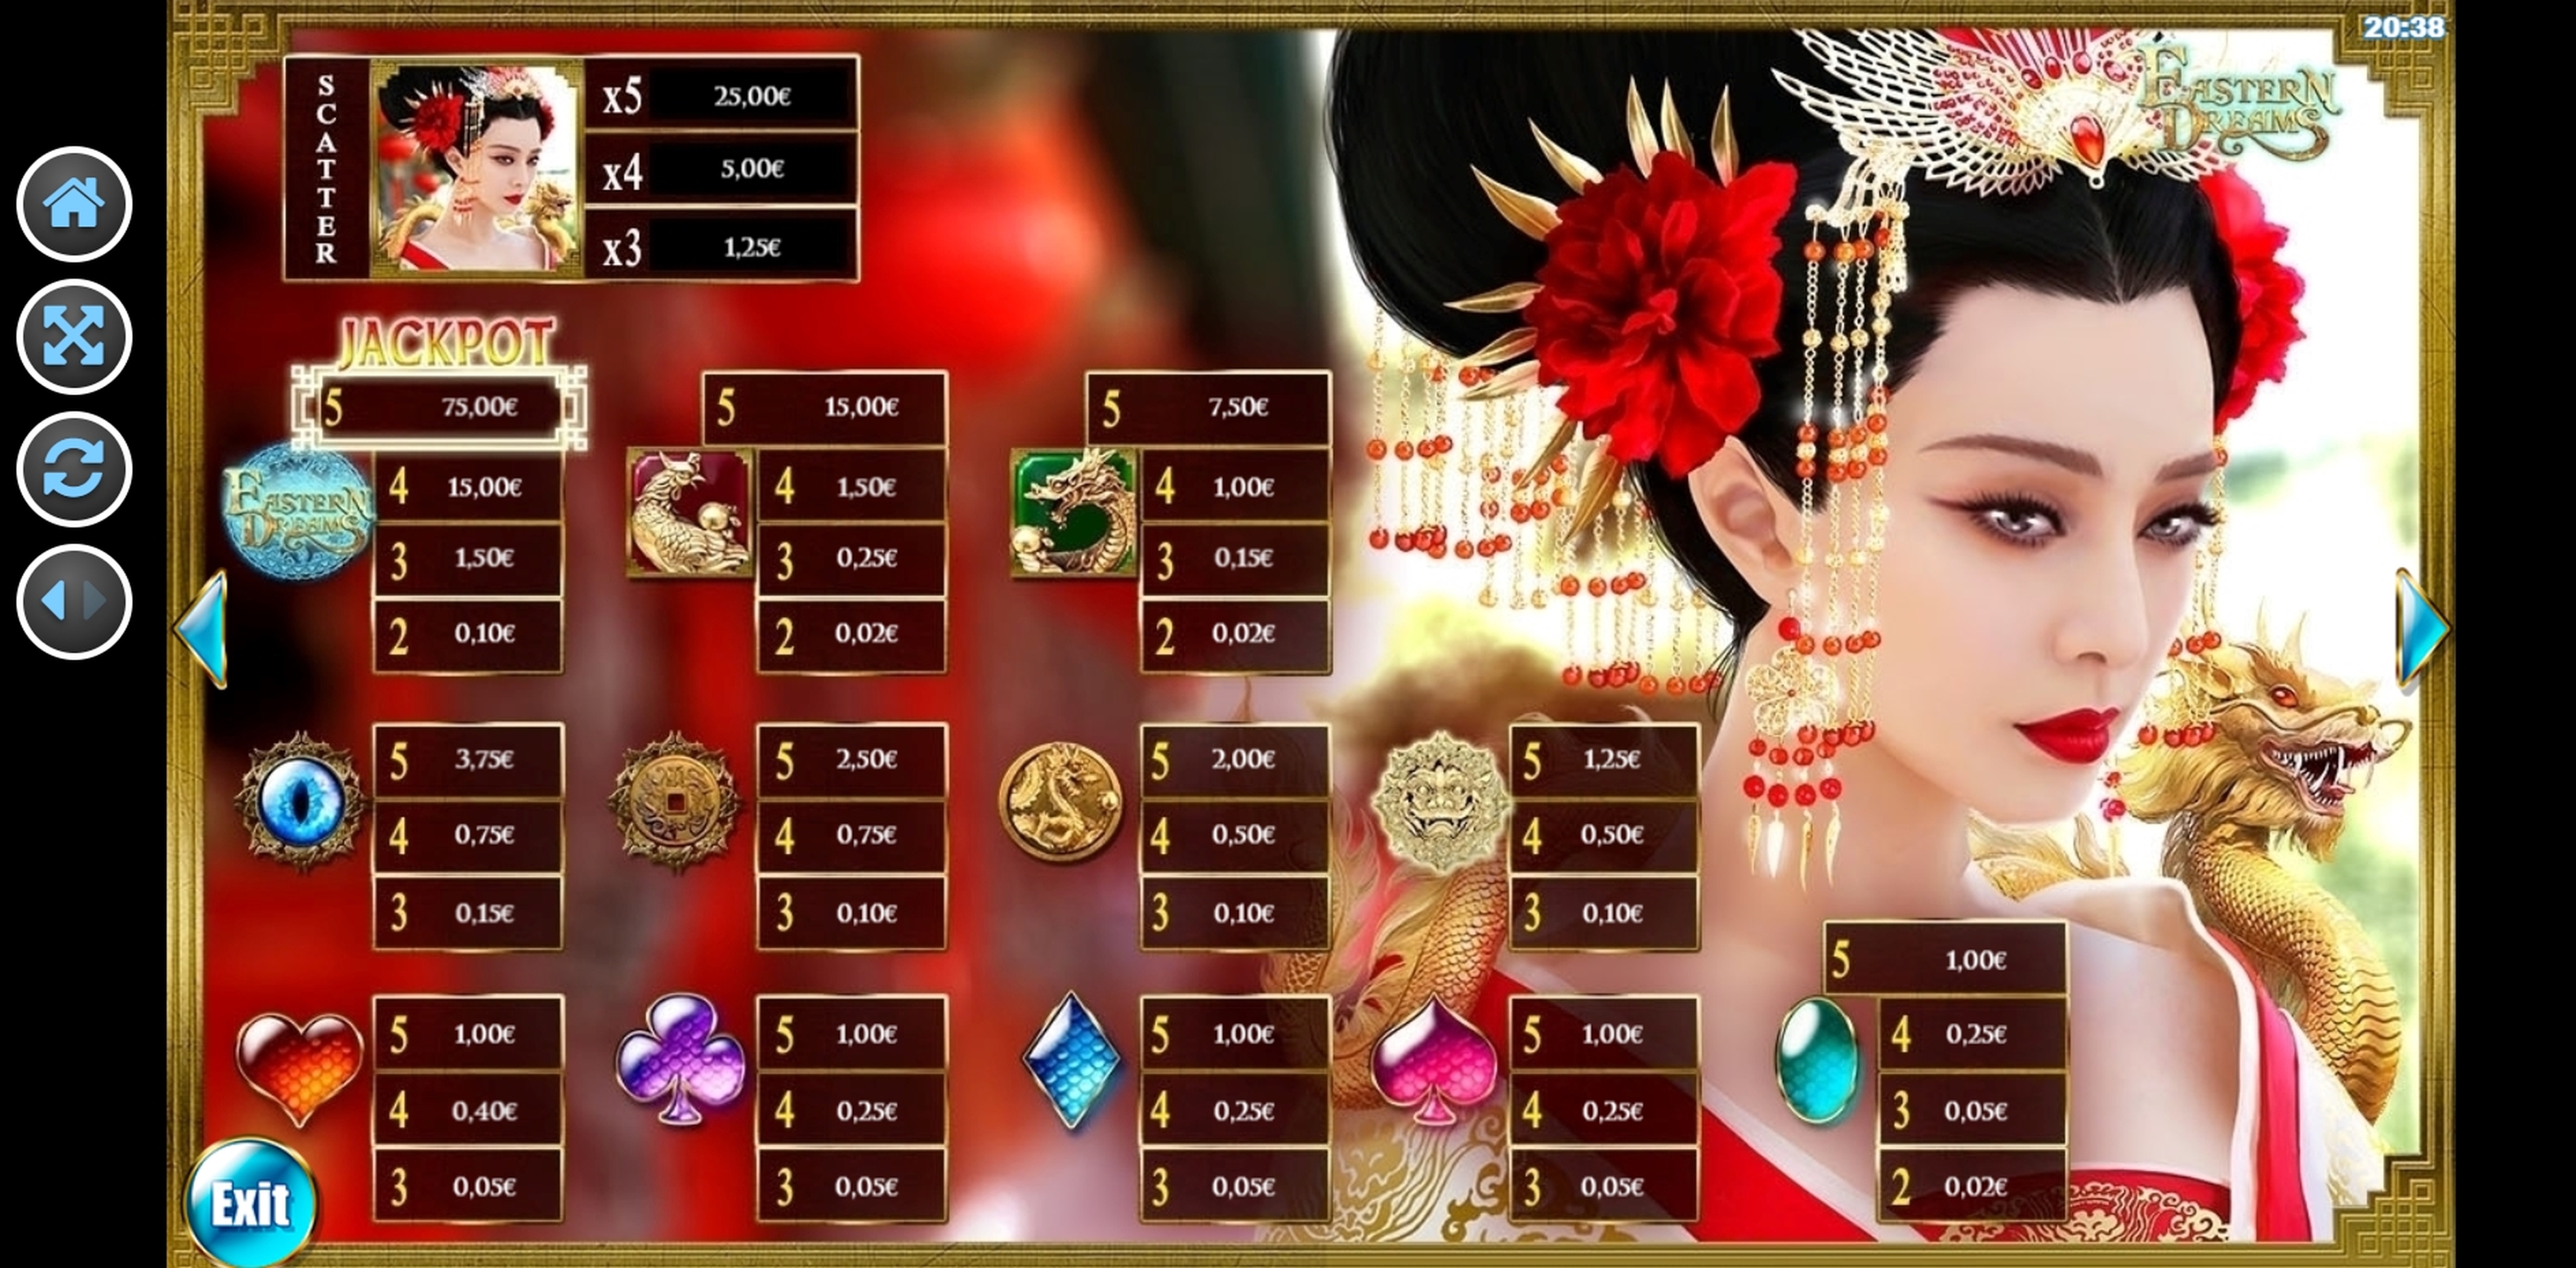 Info of Eastern Dreams Slot Game by R. Franco